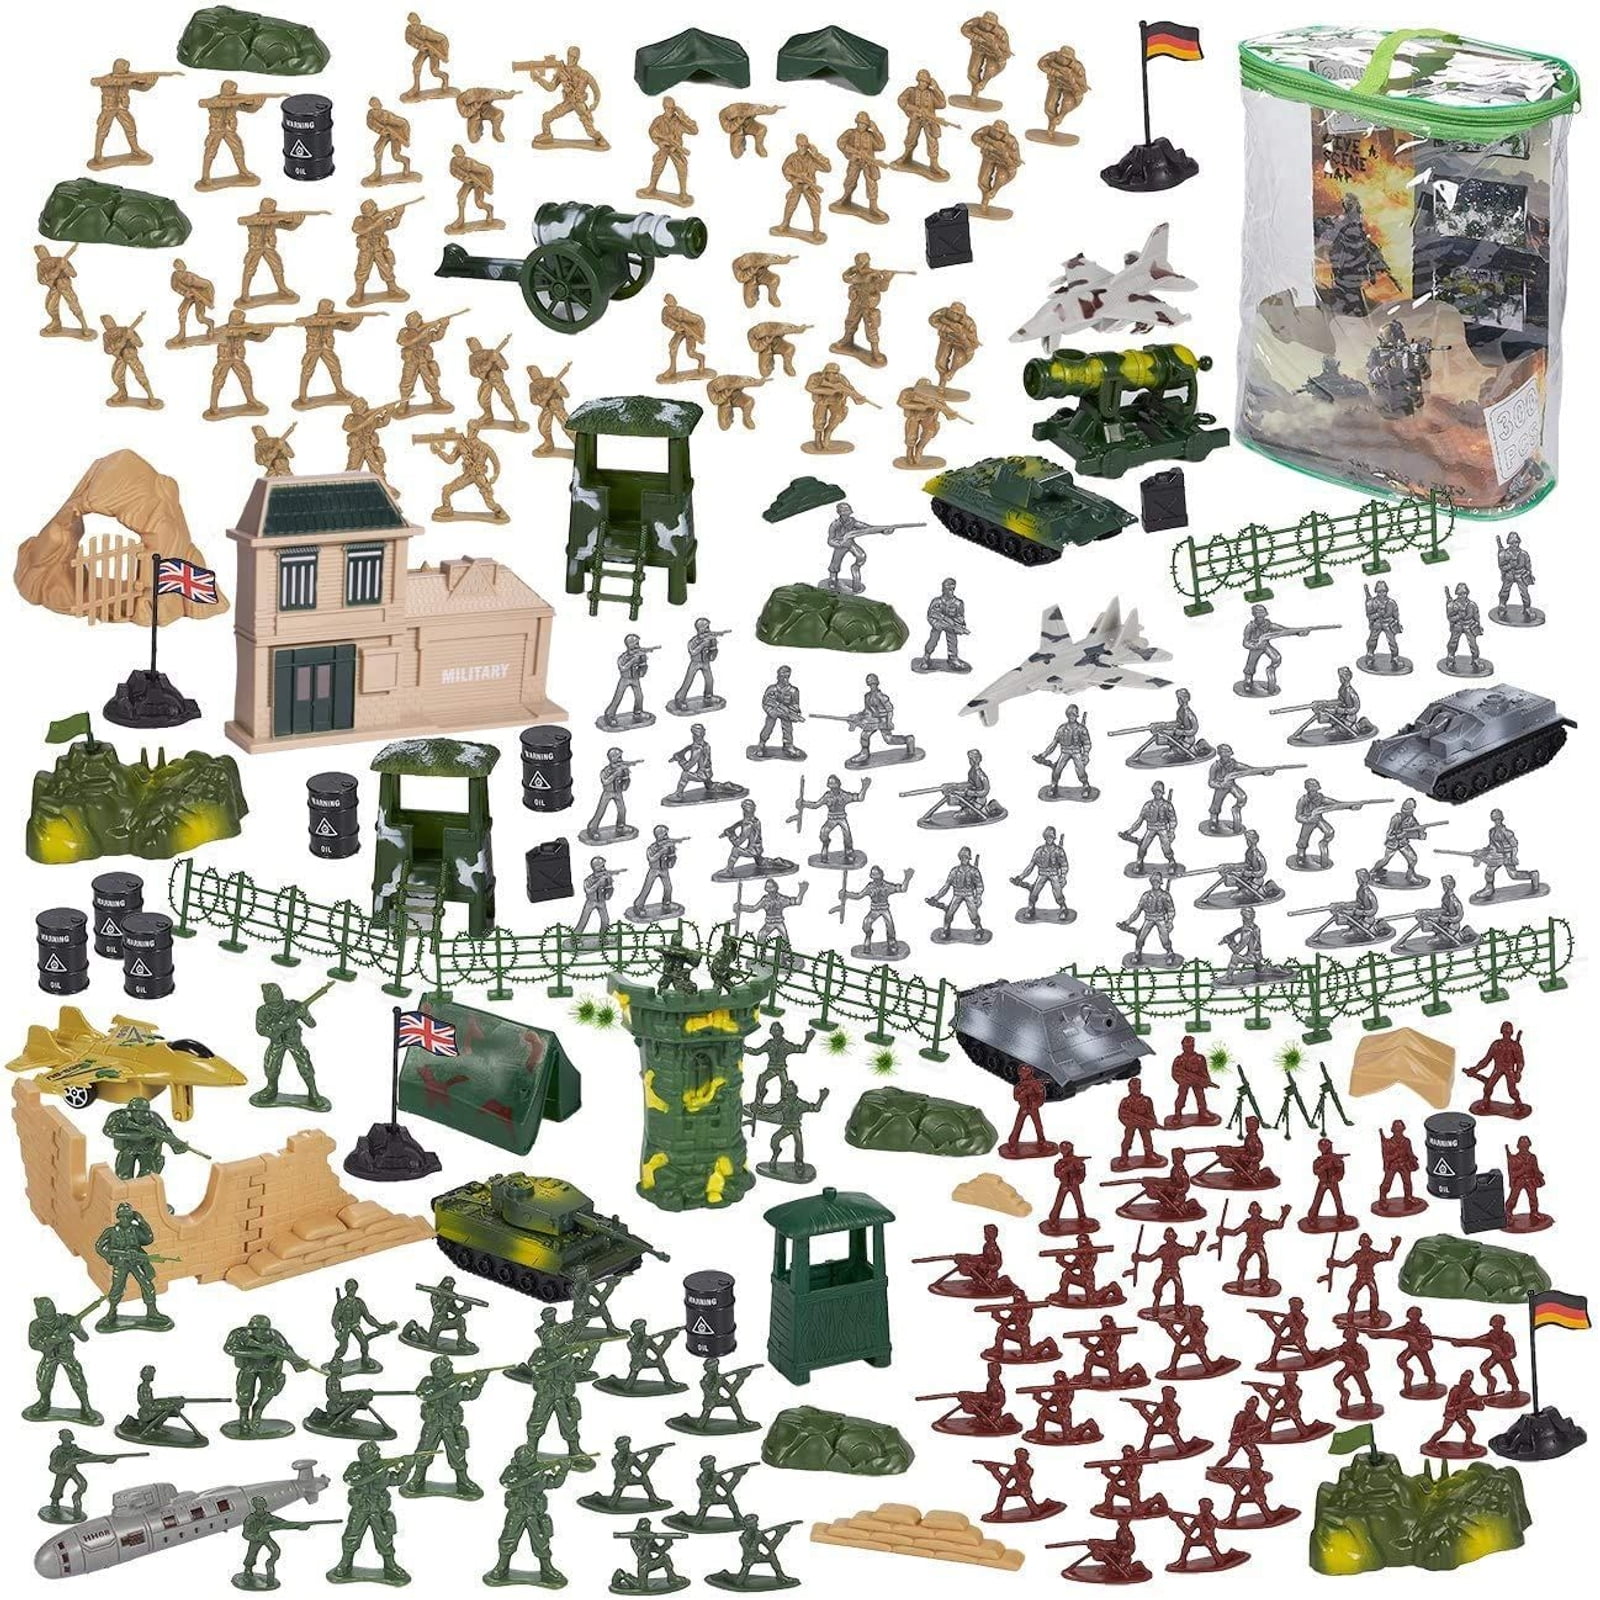 140 pcs Army Men Toy Soldiers Military Green & Tan 1 inch Figurine Action Figure 